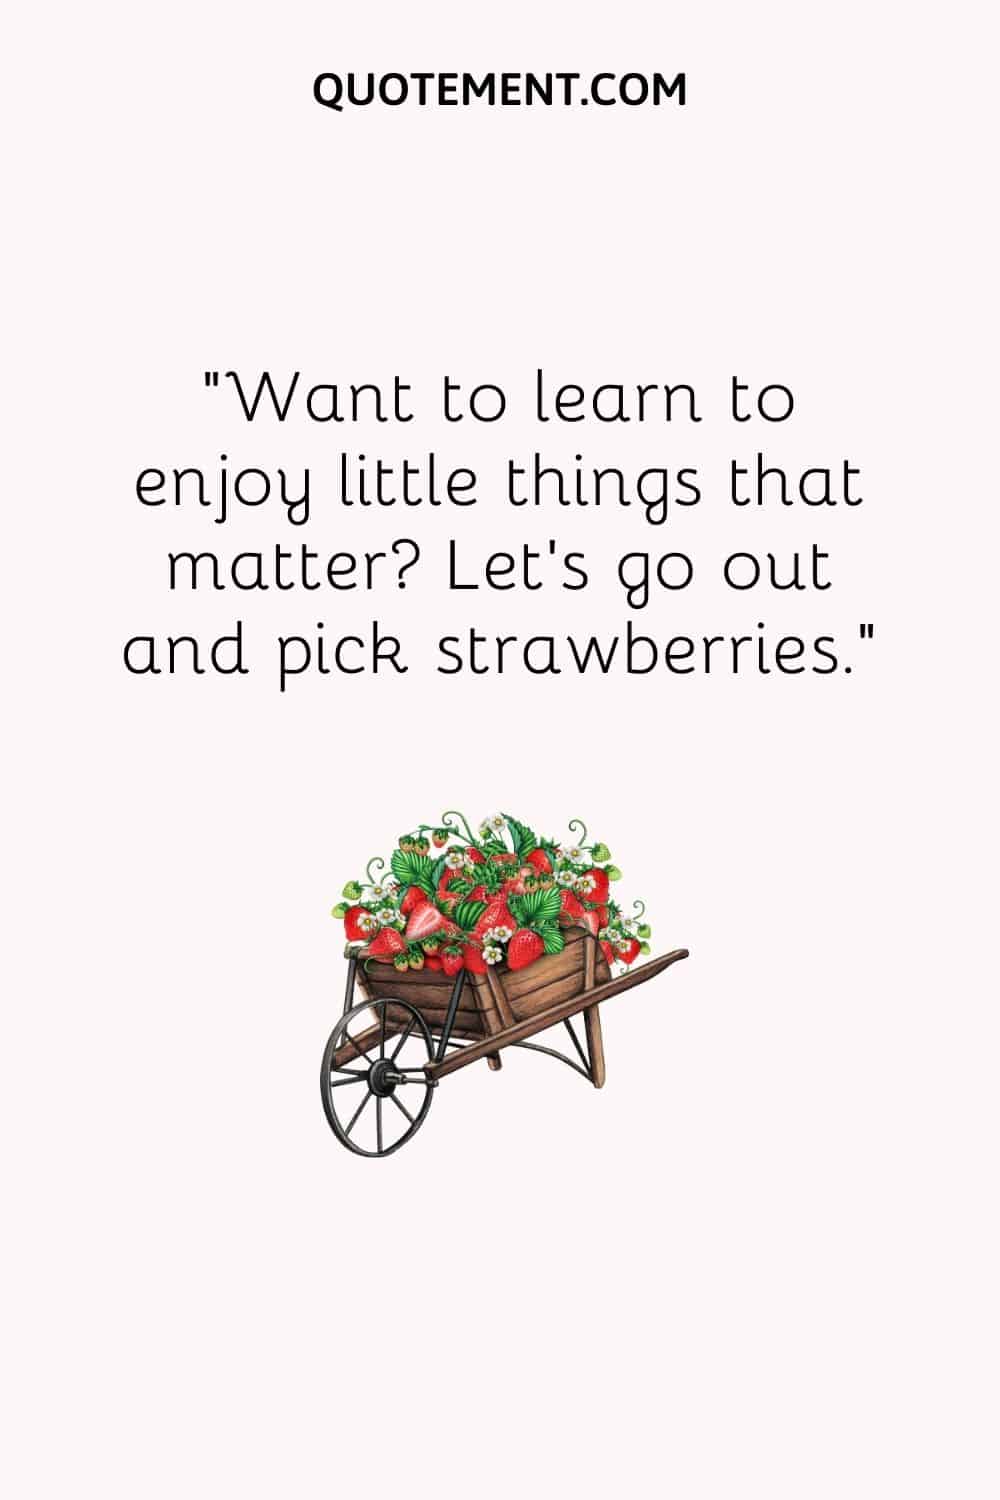 Want to learn to enjoy little things that matter Let’s go out and pick strawberries